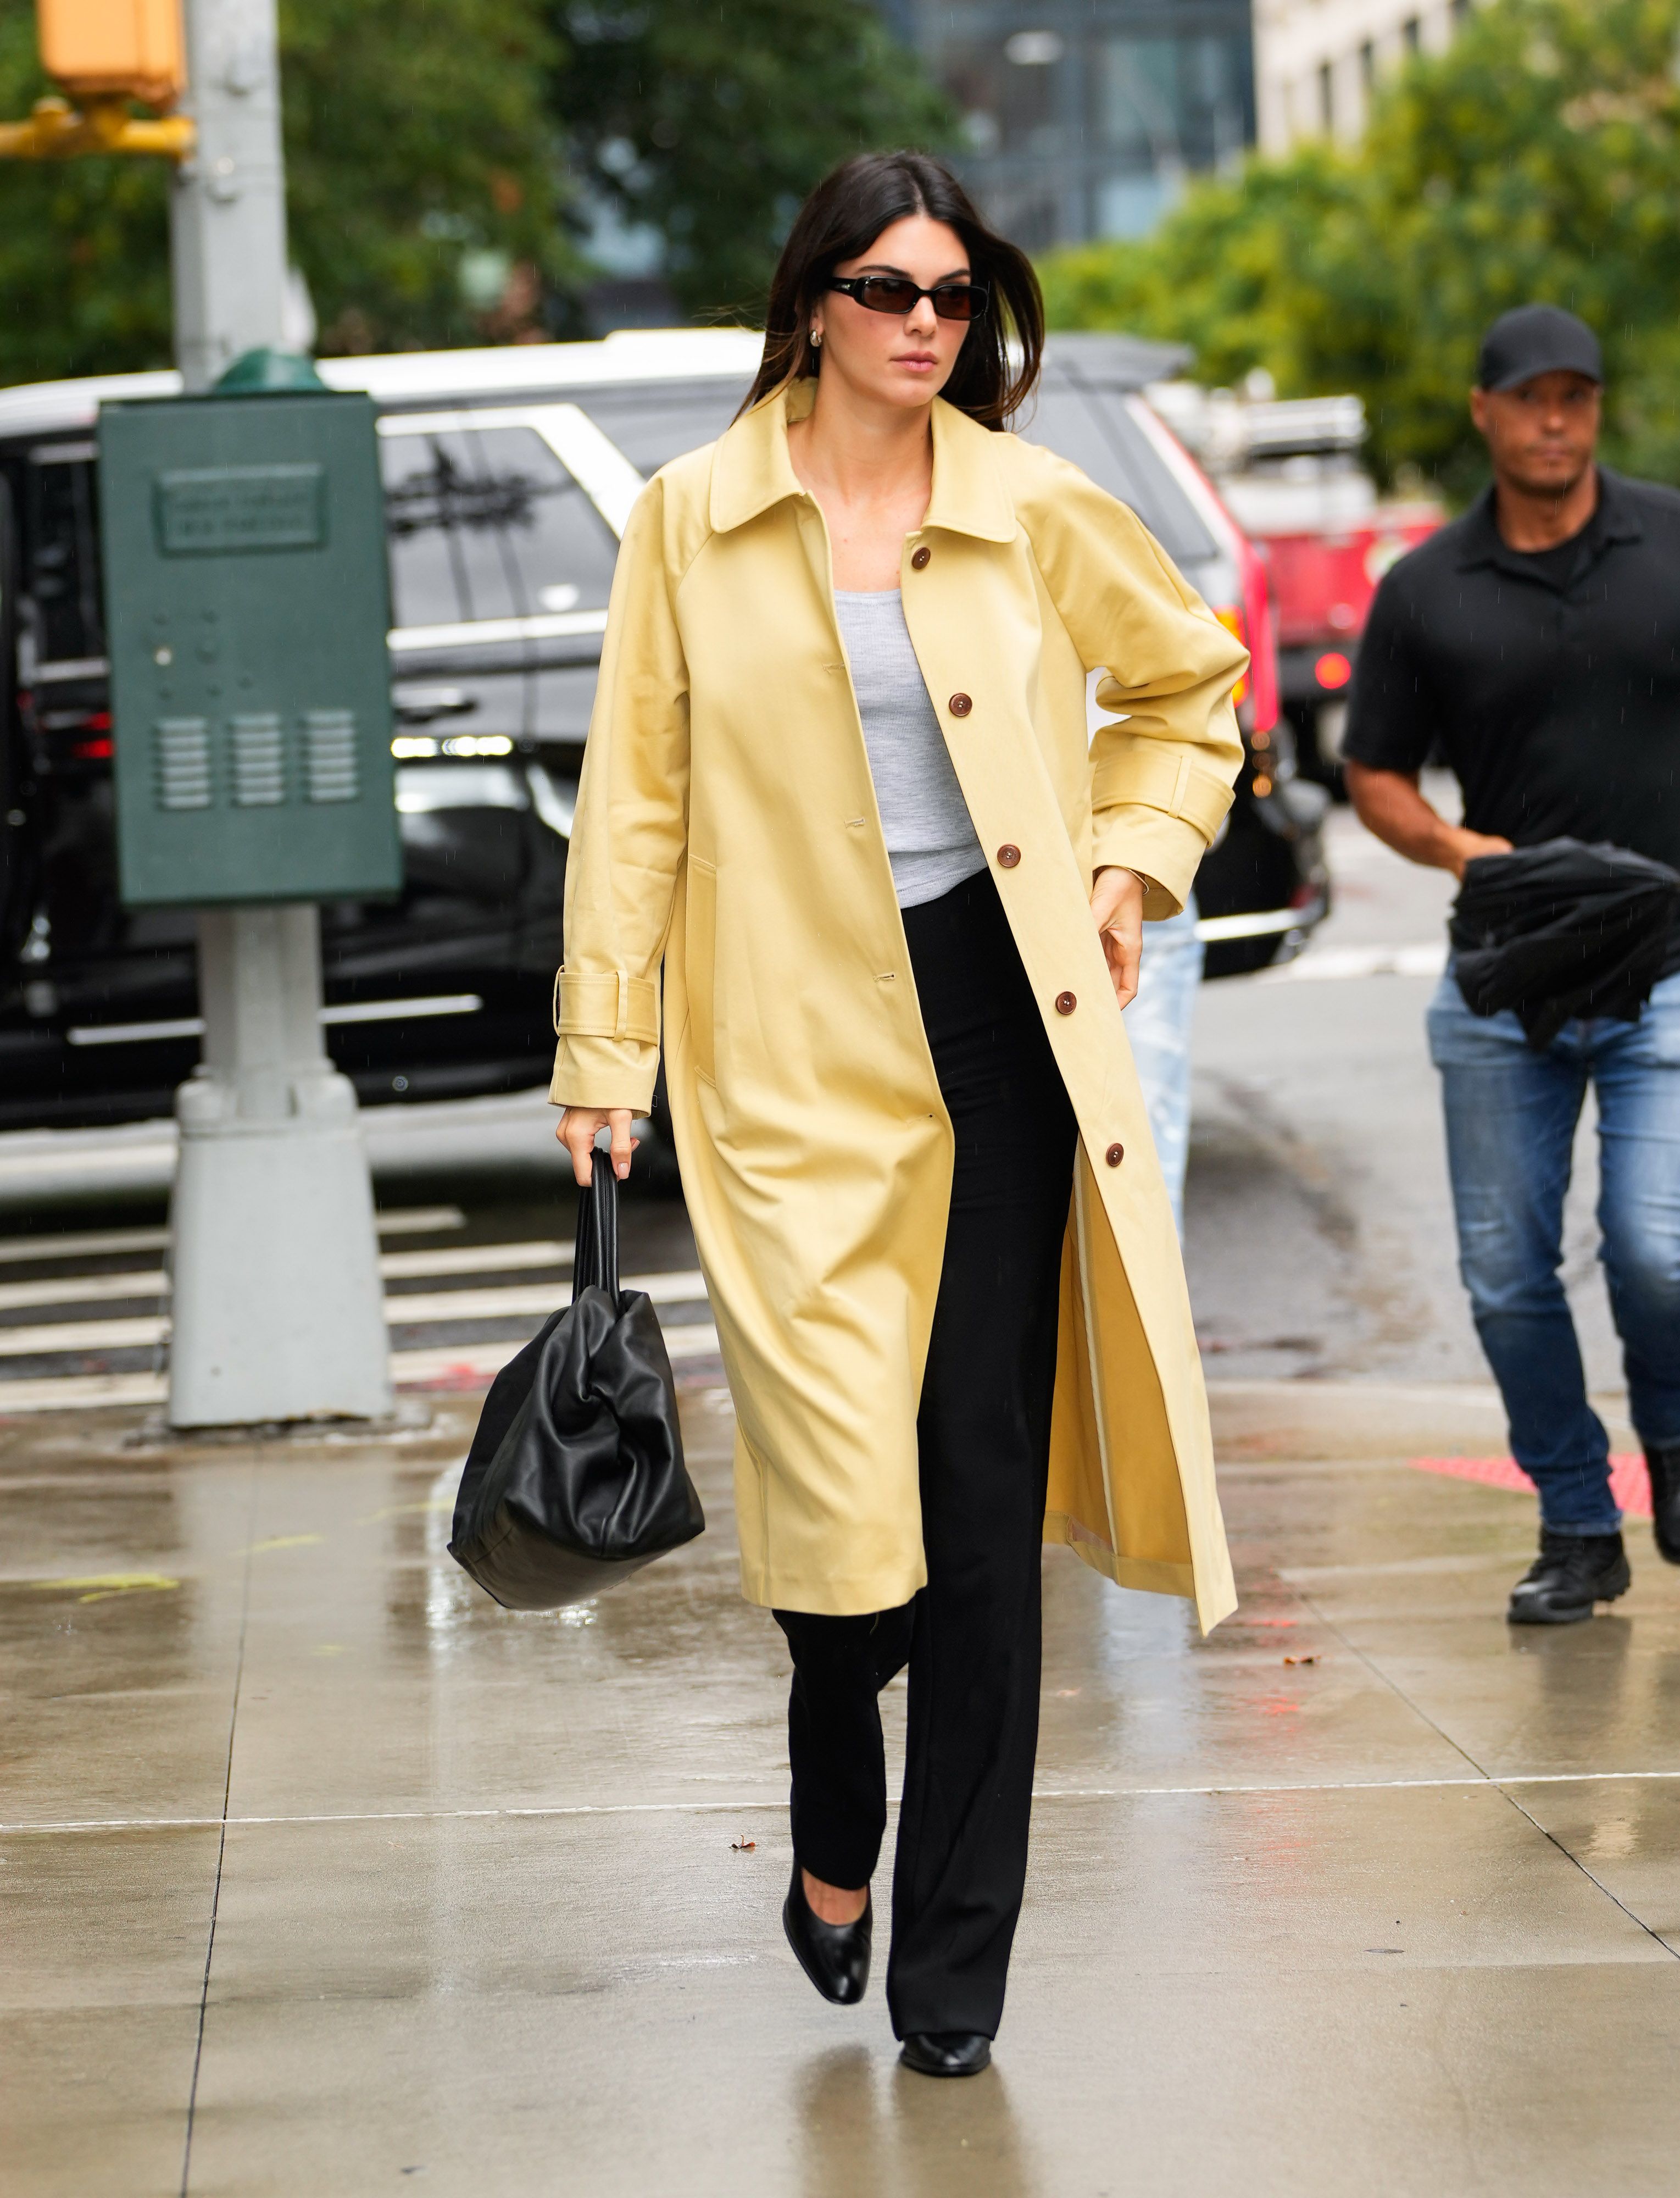 Kendall Jenner's New York Fashion Ween Street Style and the Puffer Jacket  Trend